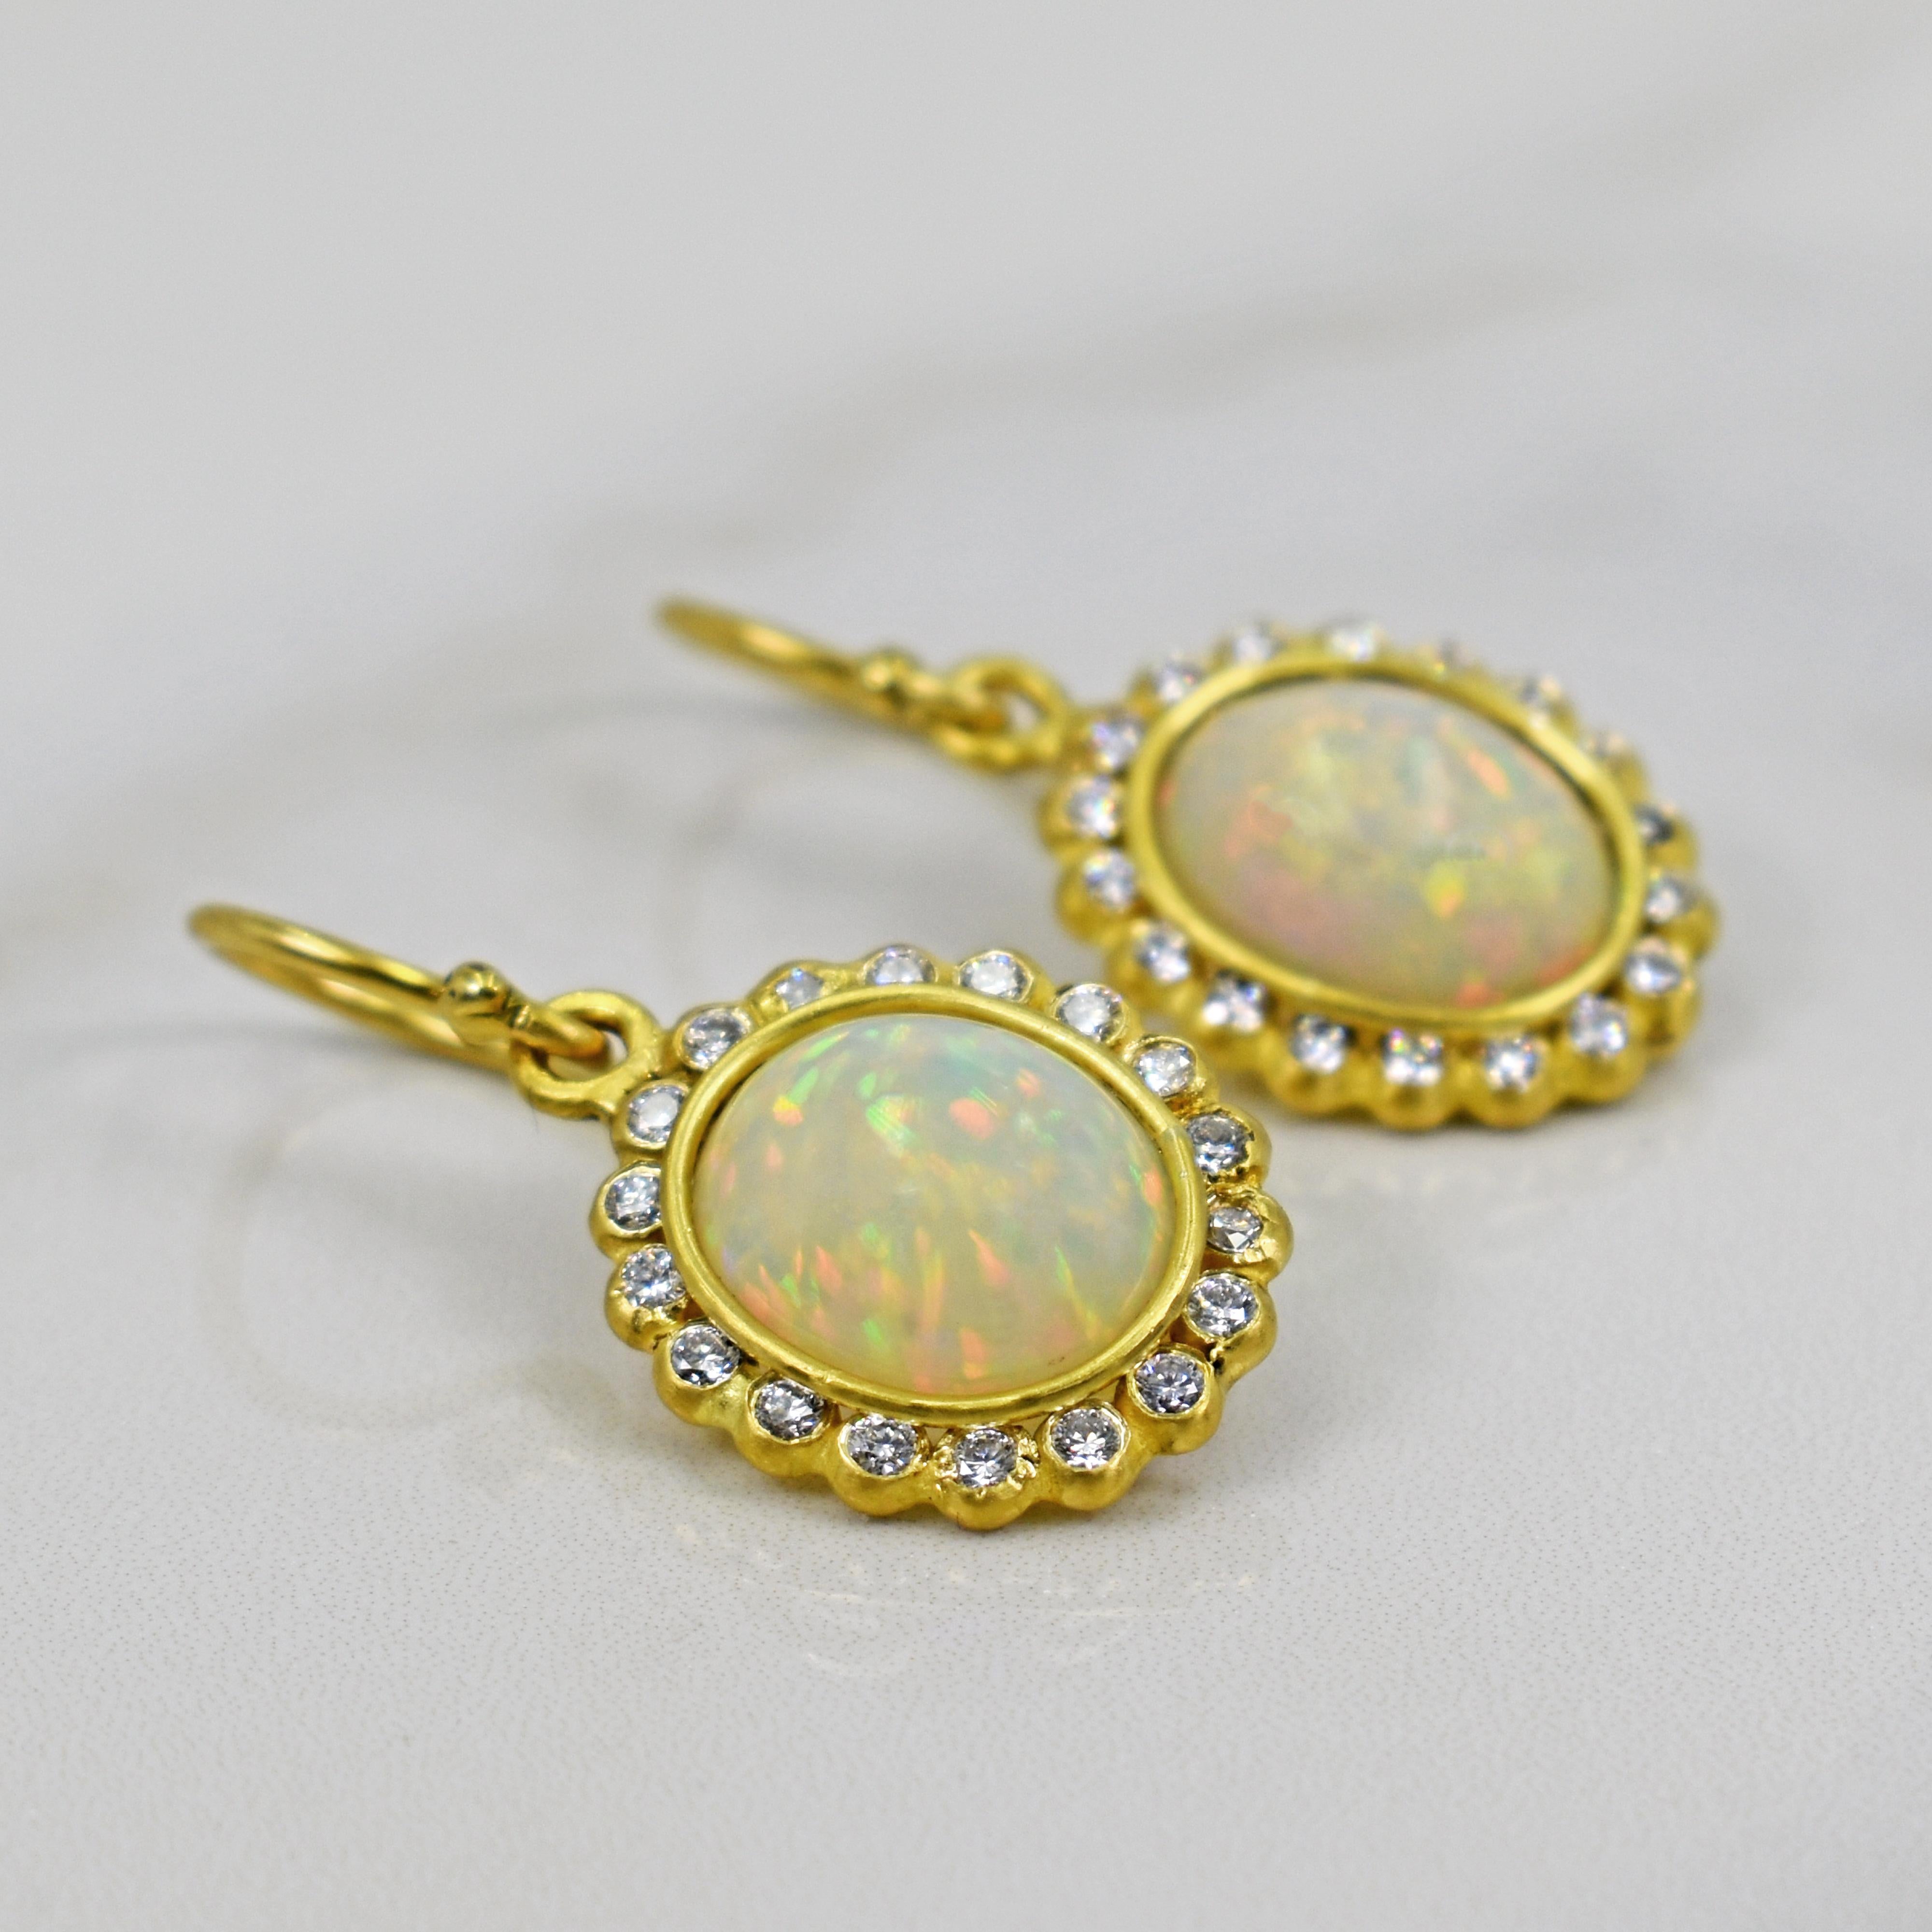 Vicki Orr Designs AAA Ethiopian Opal gemstones and 0.54 carat diamond halos set in 22k yellow gold dangle earrings. Earrings are 1.19 inches in length. Gorgeous, artisan dangle earrings with excellent, fiery Opal gemstones. 